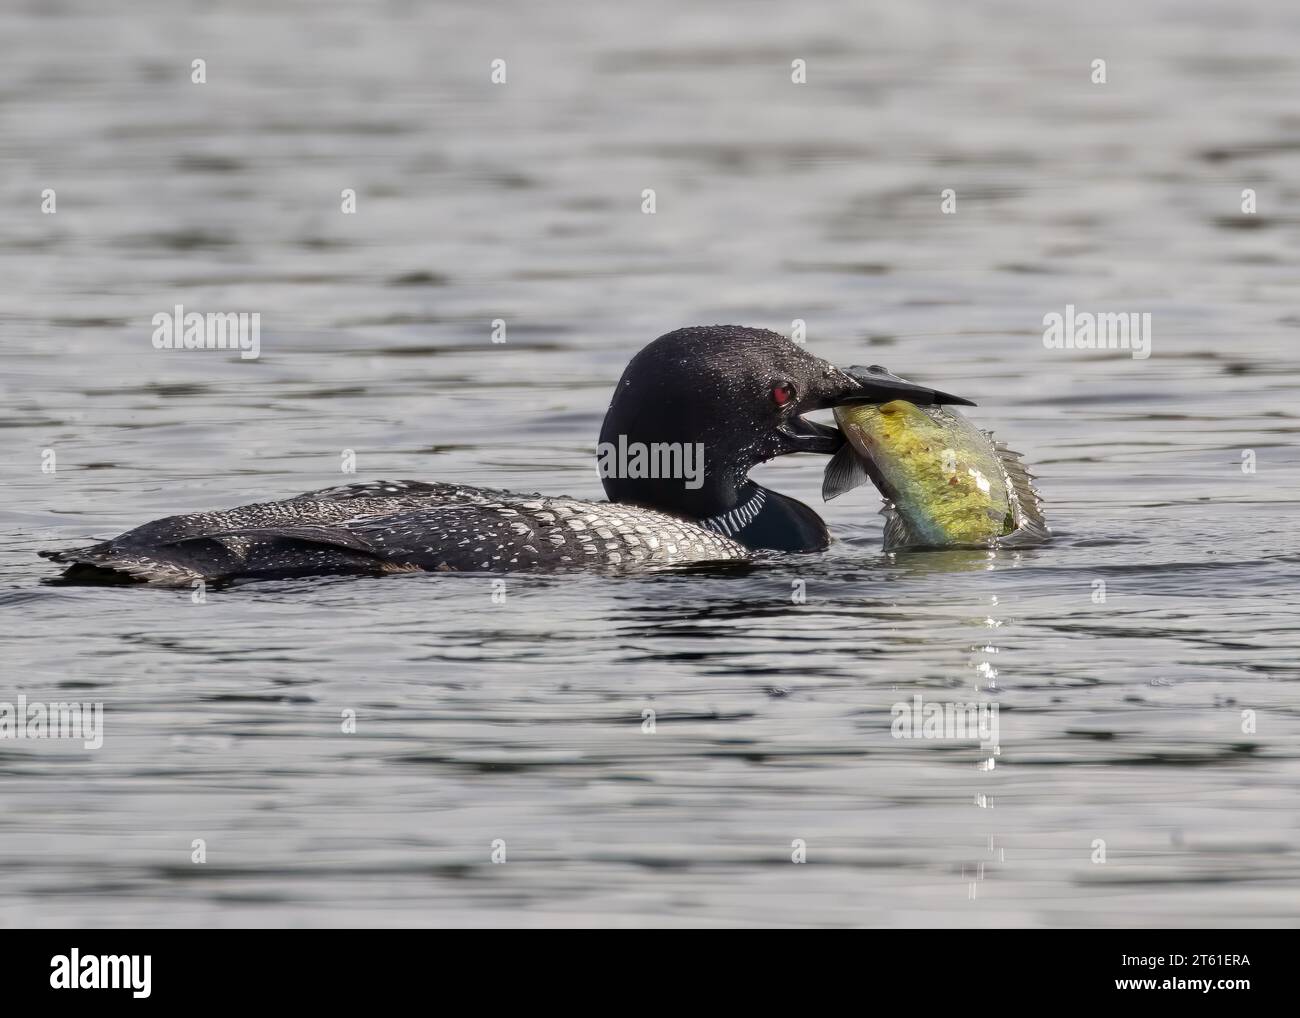 Adult Common Loon Common Loon (Gavia immer) chomping on a Bluegill Sunfish on a northern Minnesota lake in mid summer in the Chippewa National Forest, Stock Photo